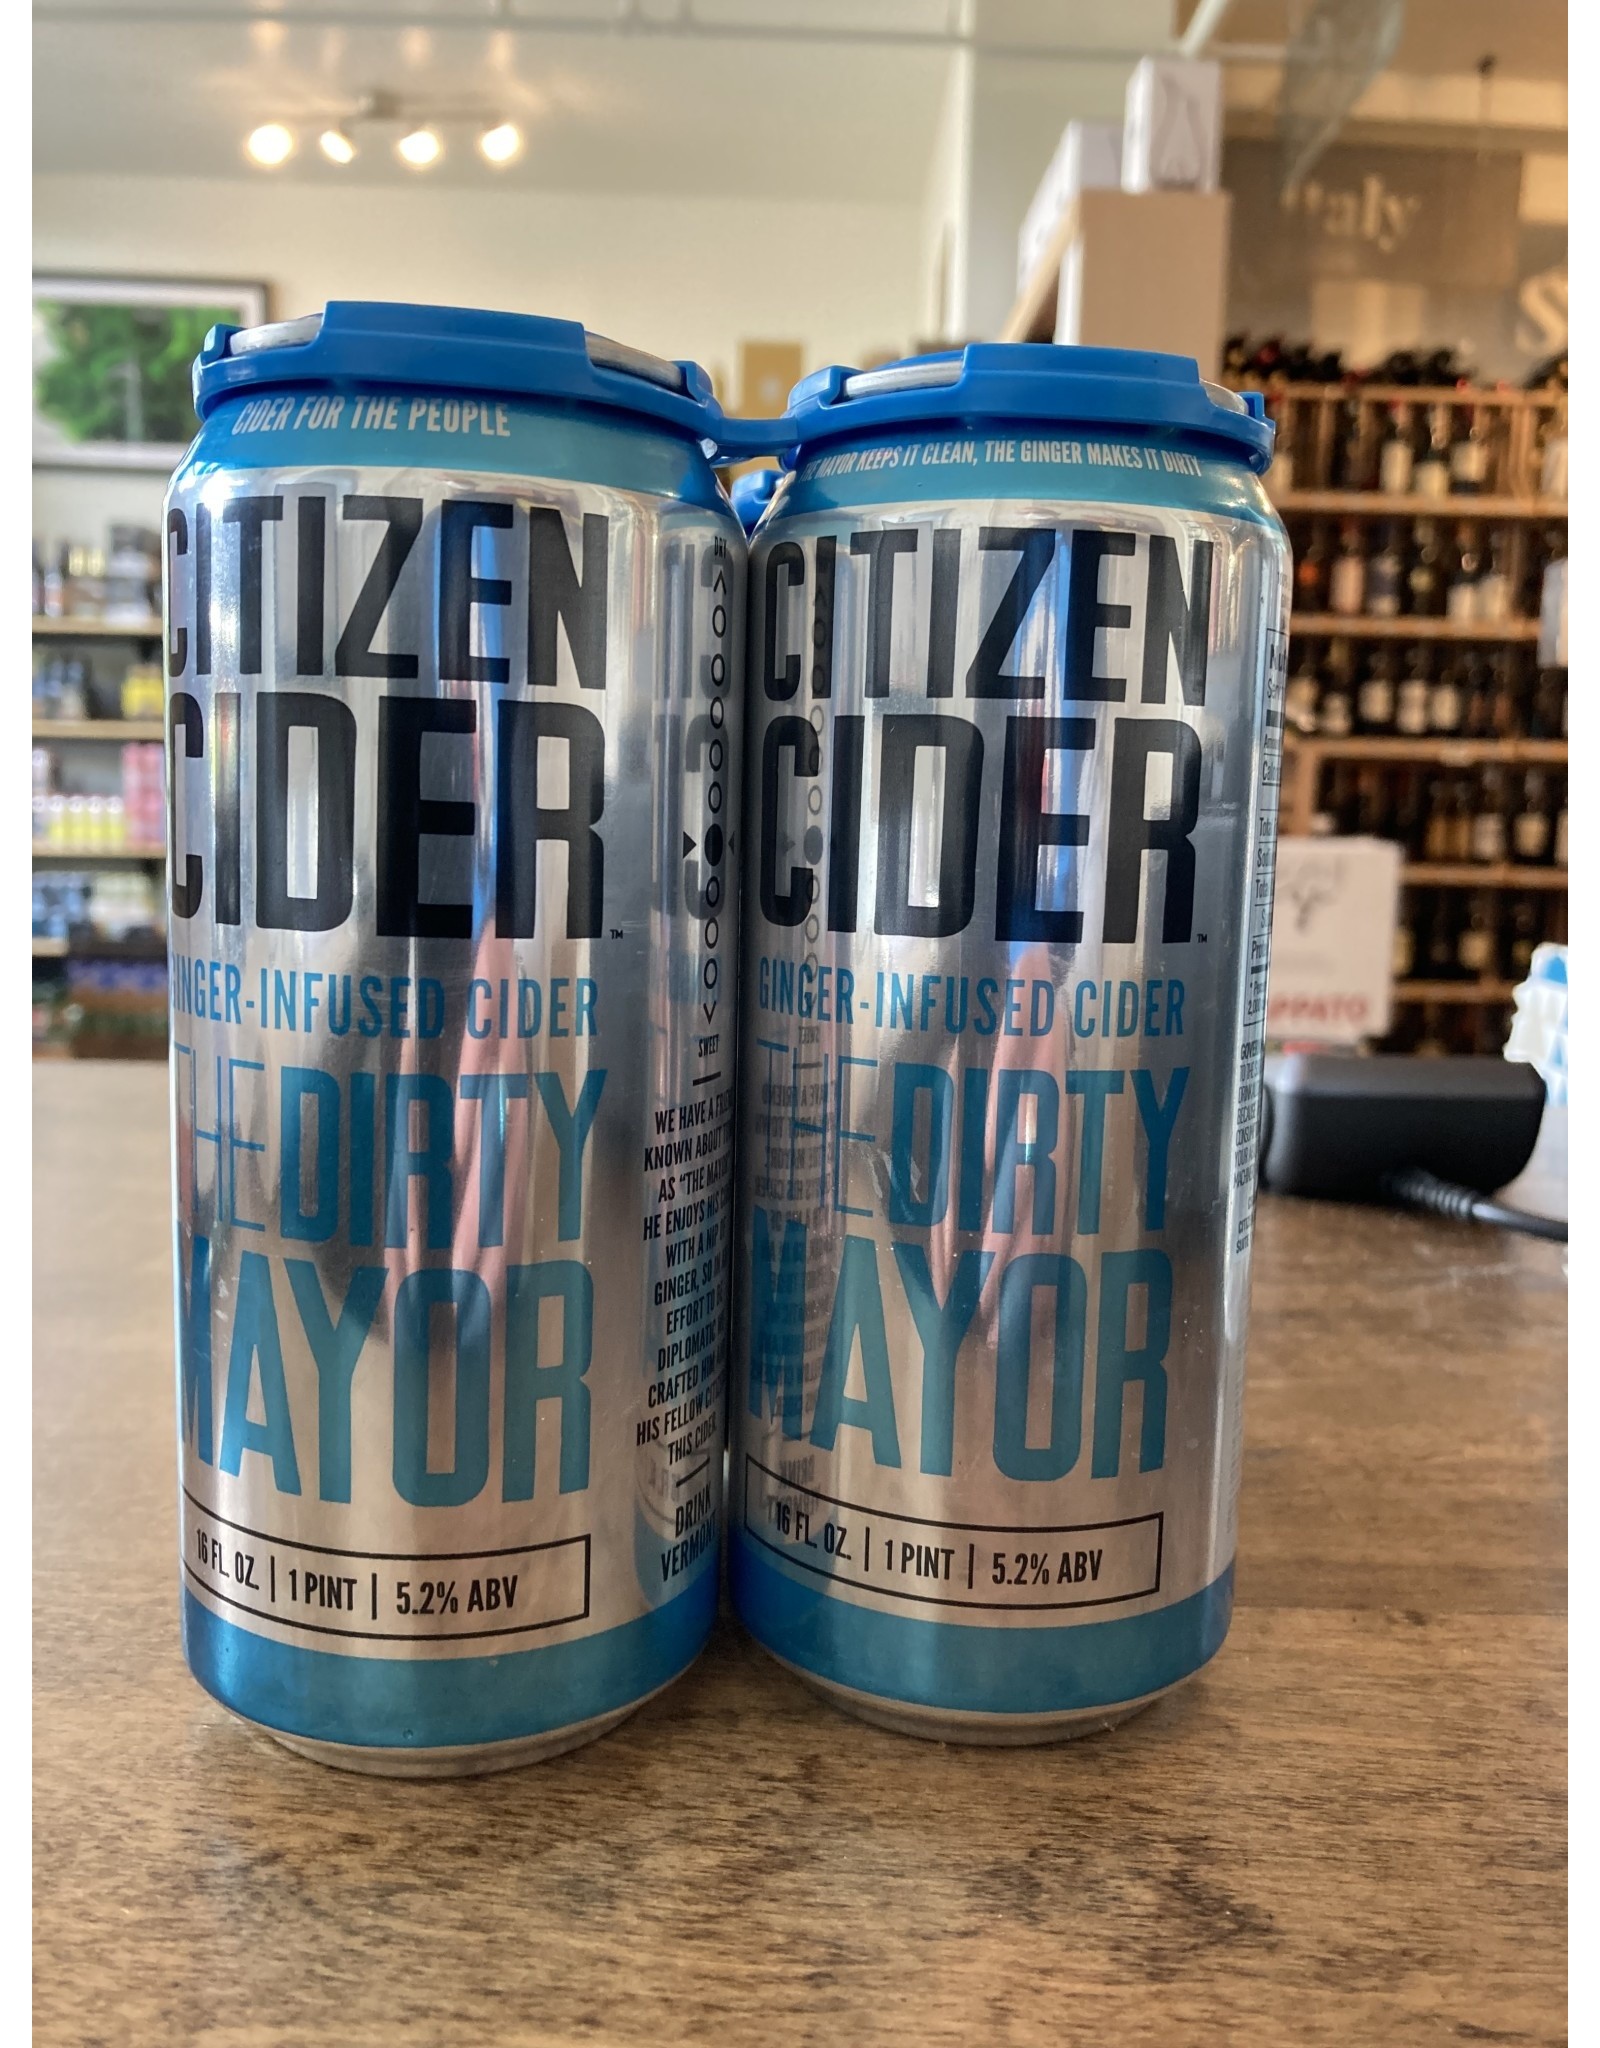 Citizen Cider The Dirty Mayor - Bottle House